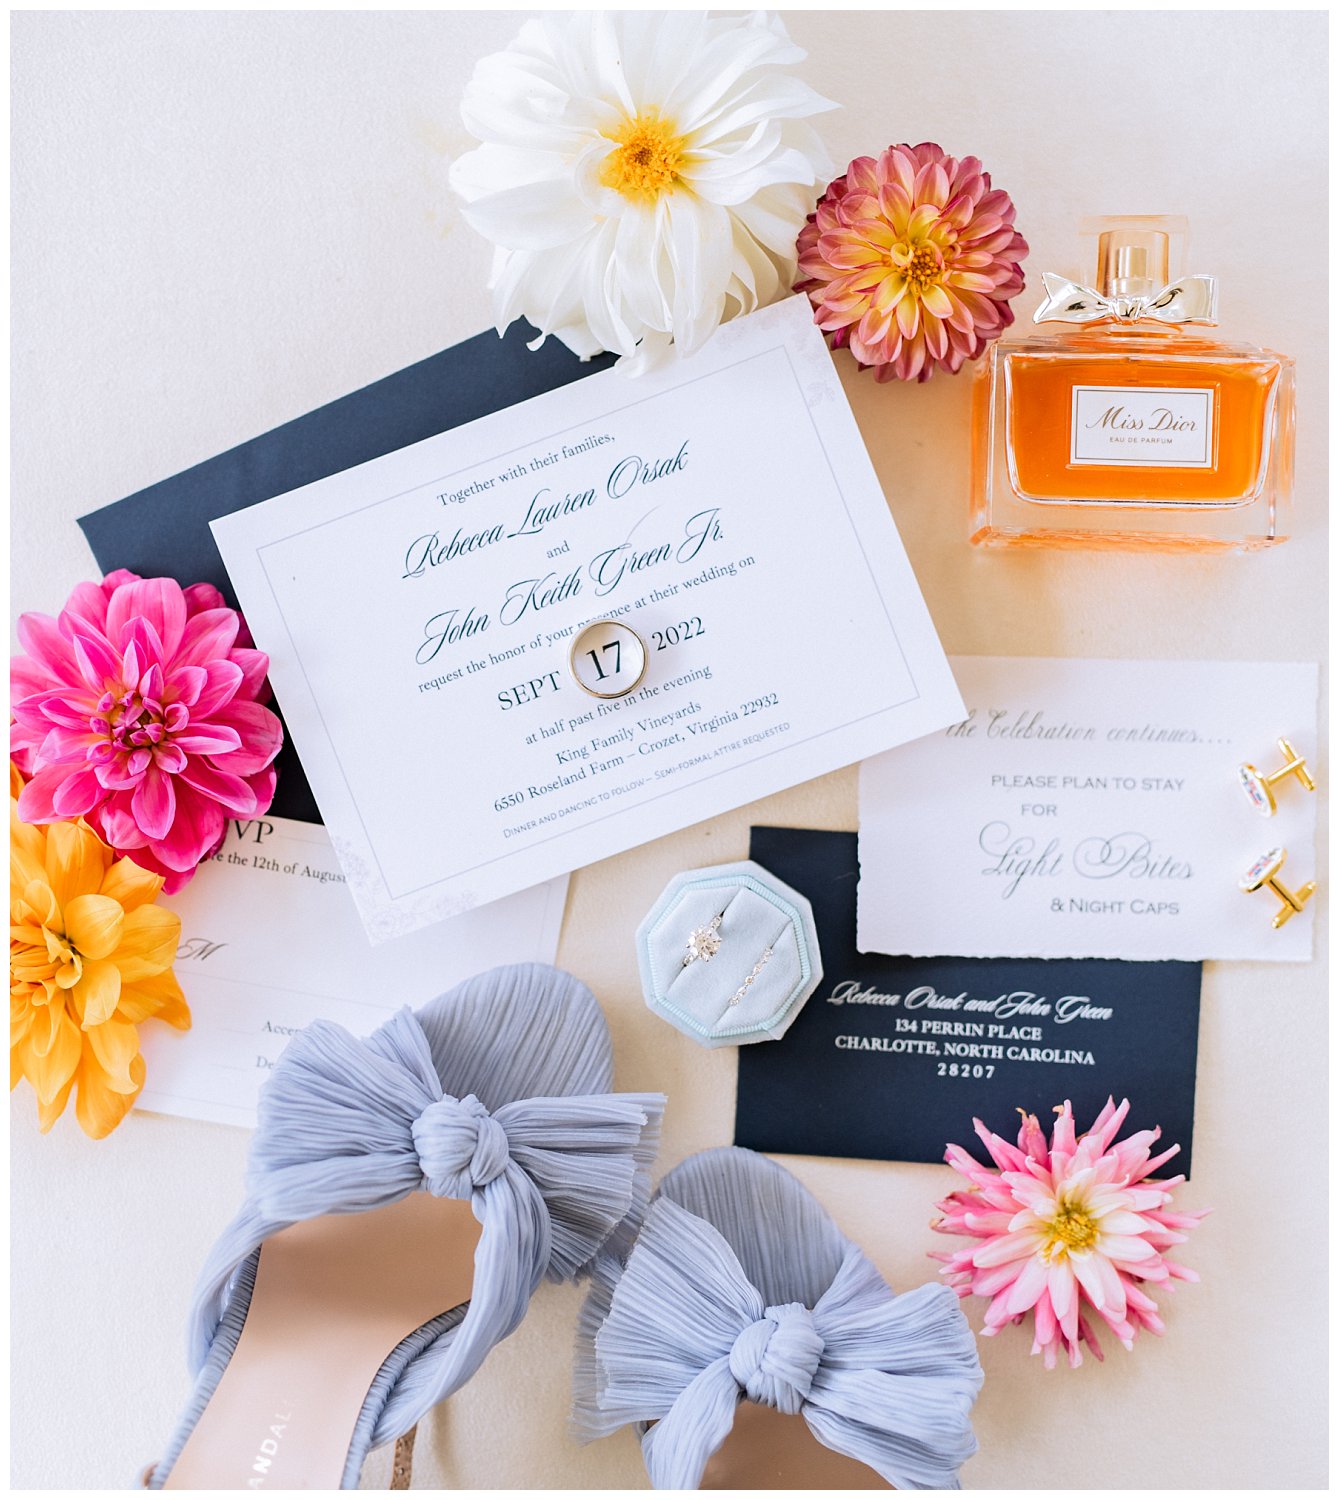 Vibrant and colorful wedding invitations and bridal details